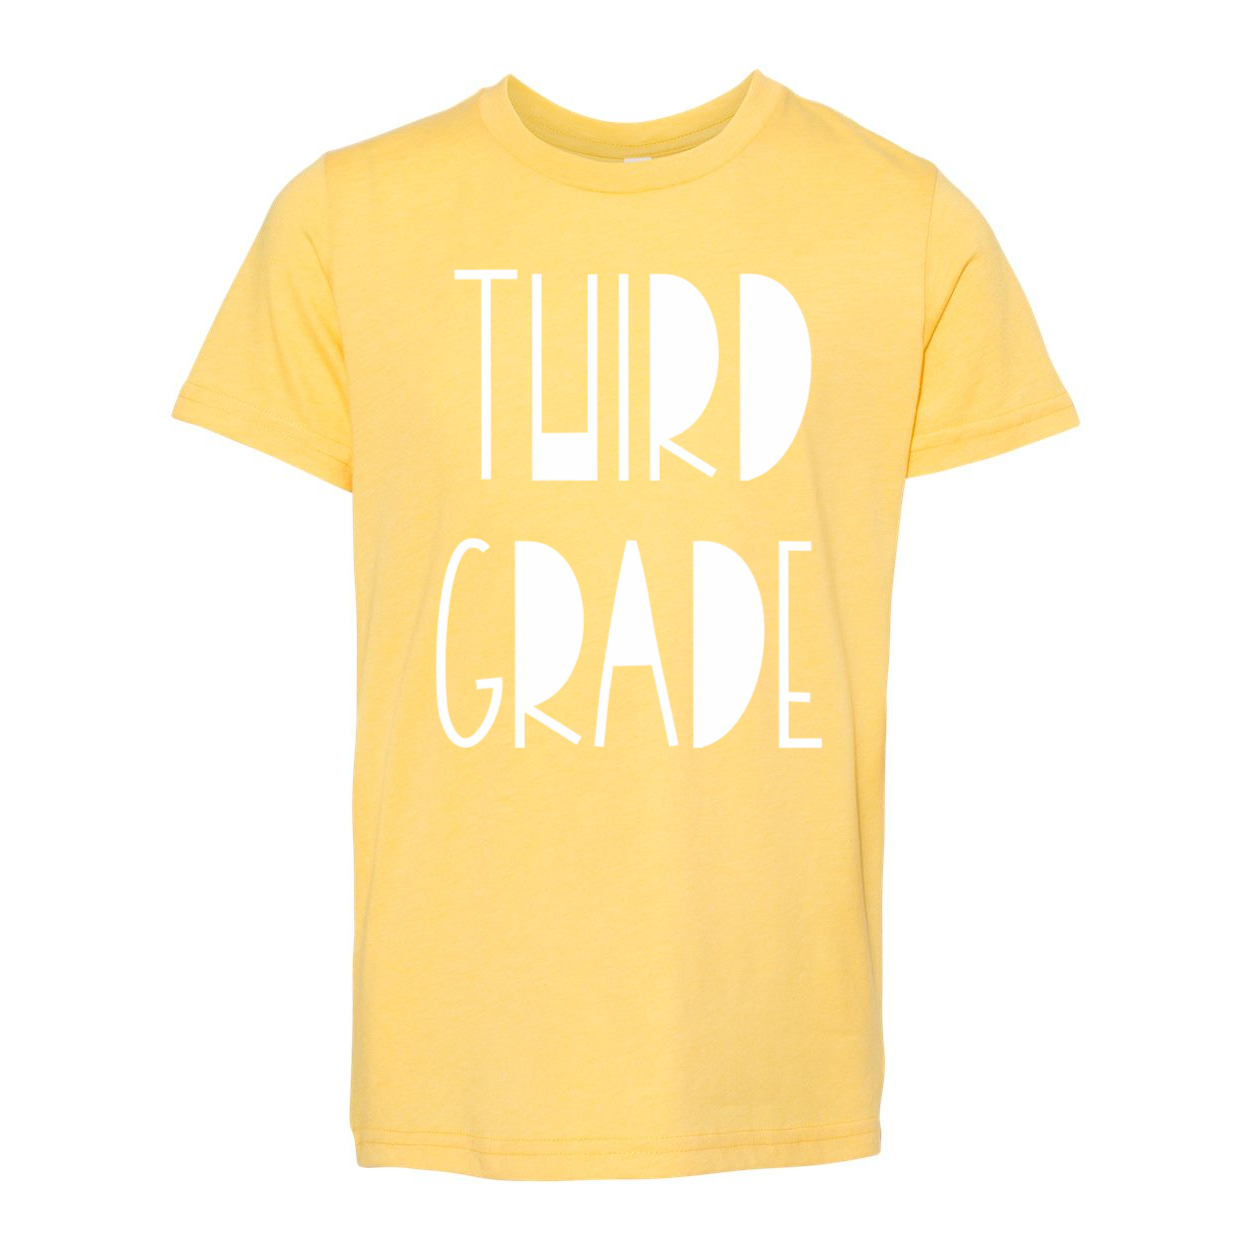 Third Grade YOUTH Funky Font Tee